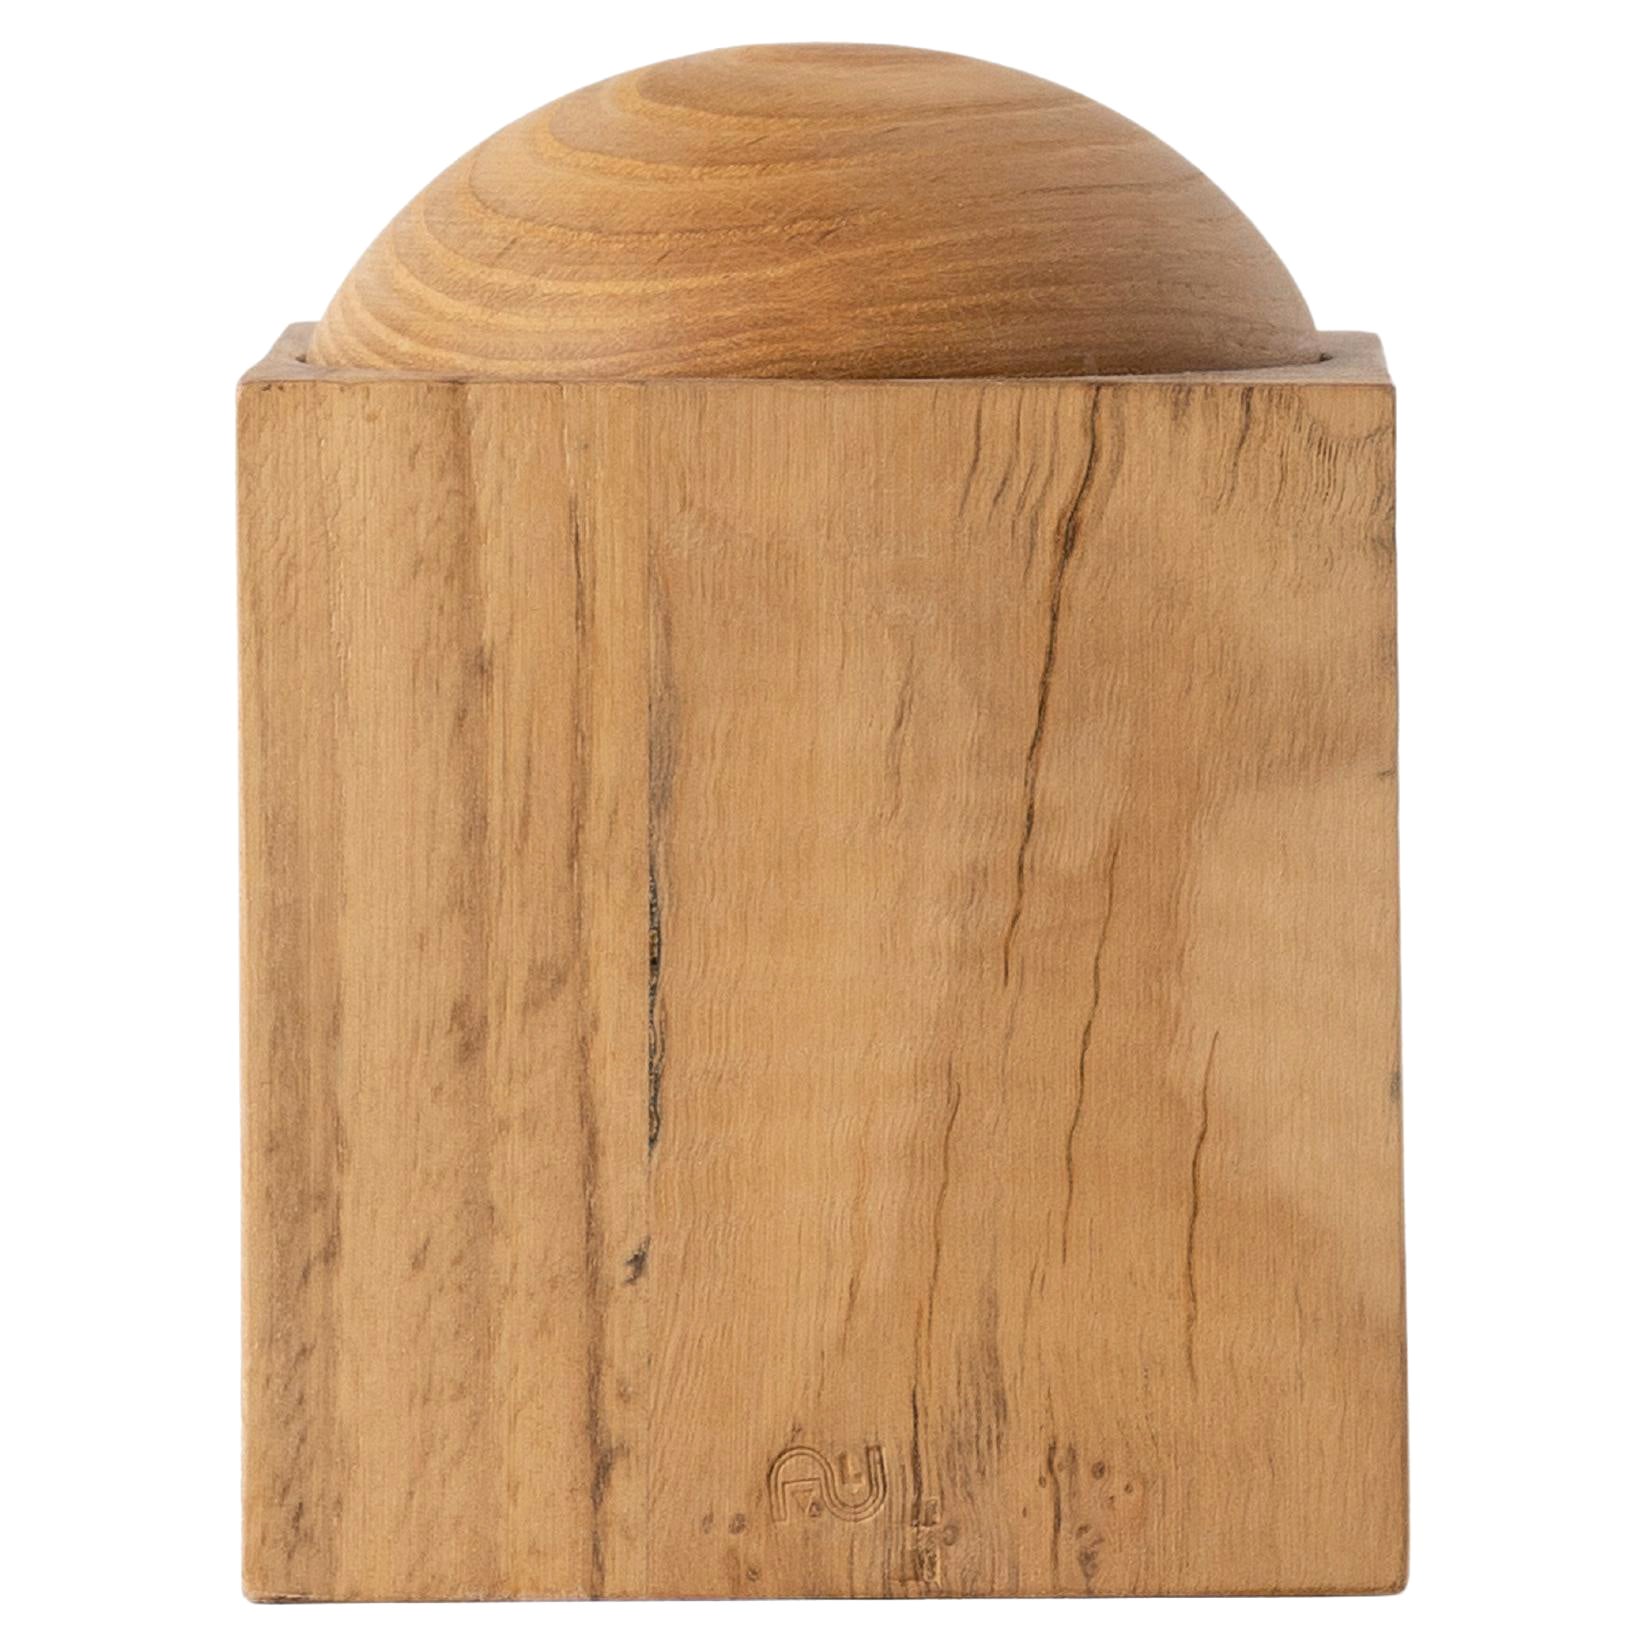 Contemporary Modern, Bebek Chestnut Wood Single-Compartment Box For Sale